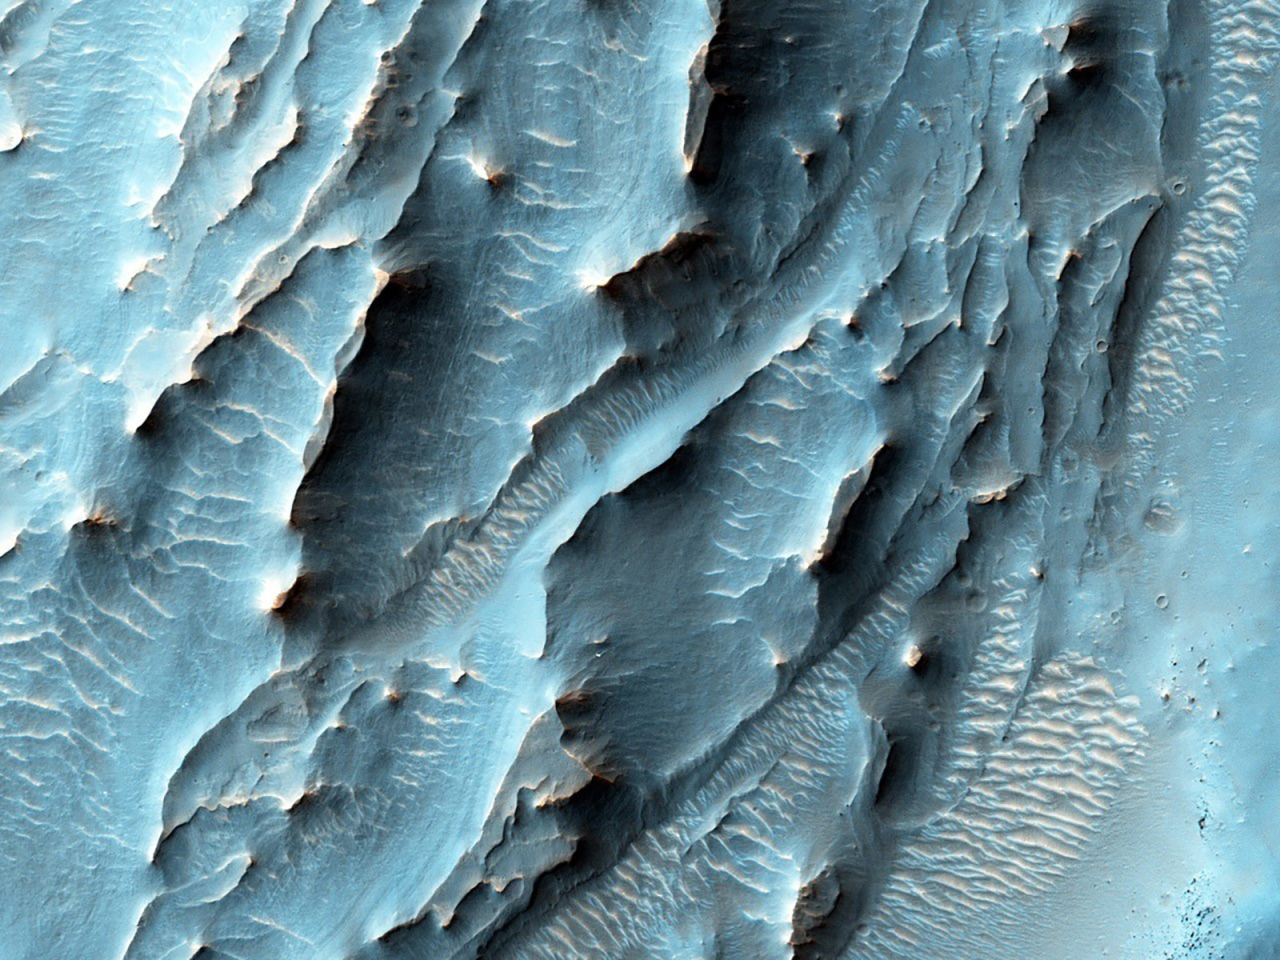 The Mars Reconnaissance Orbiter used its HiRISE camera to obtain this view of an area with unusual texture on the southern floor of Gale Crater.